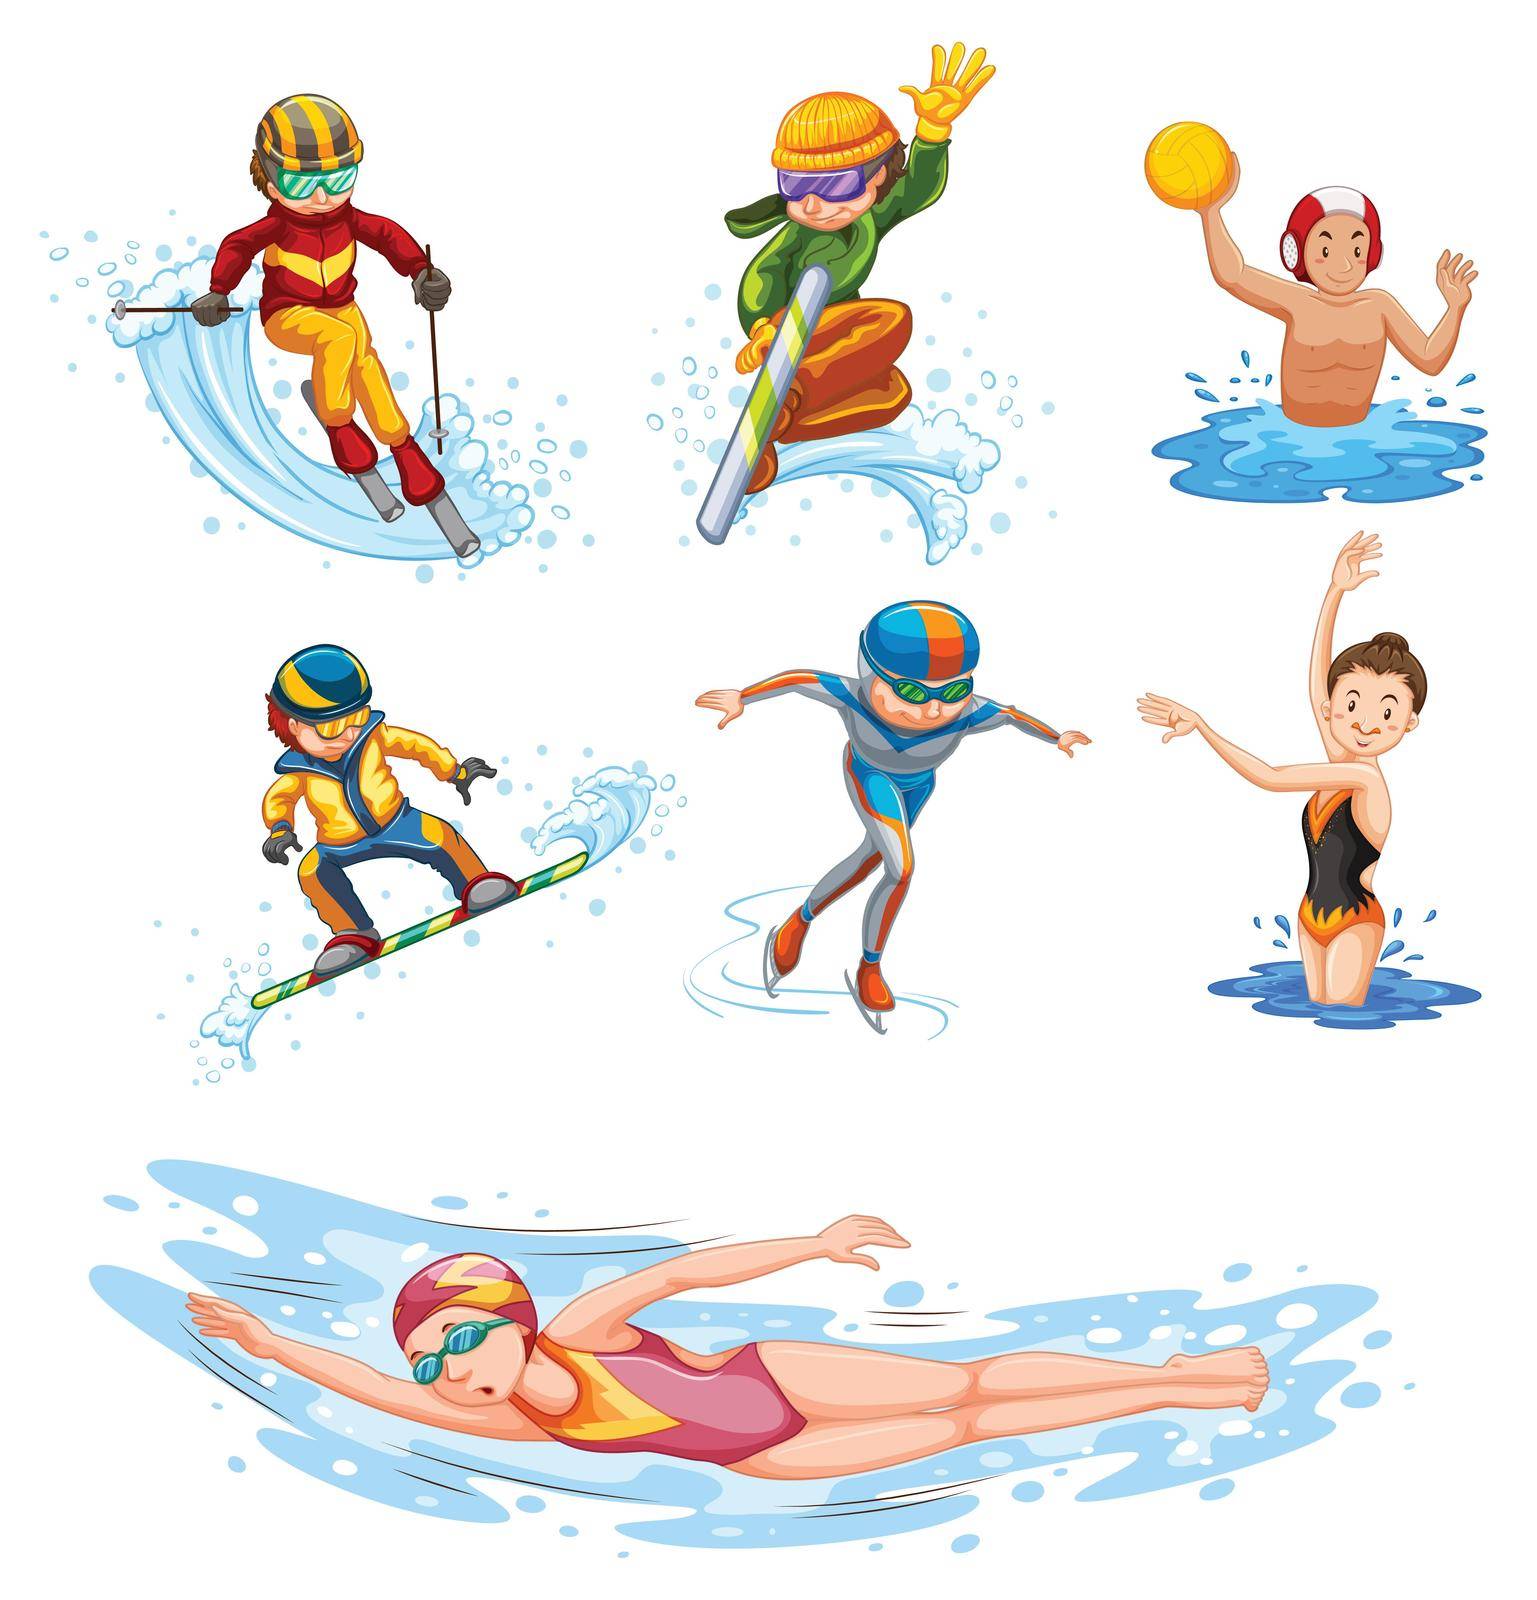 Sporting activity people on white background illustration